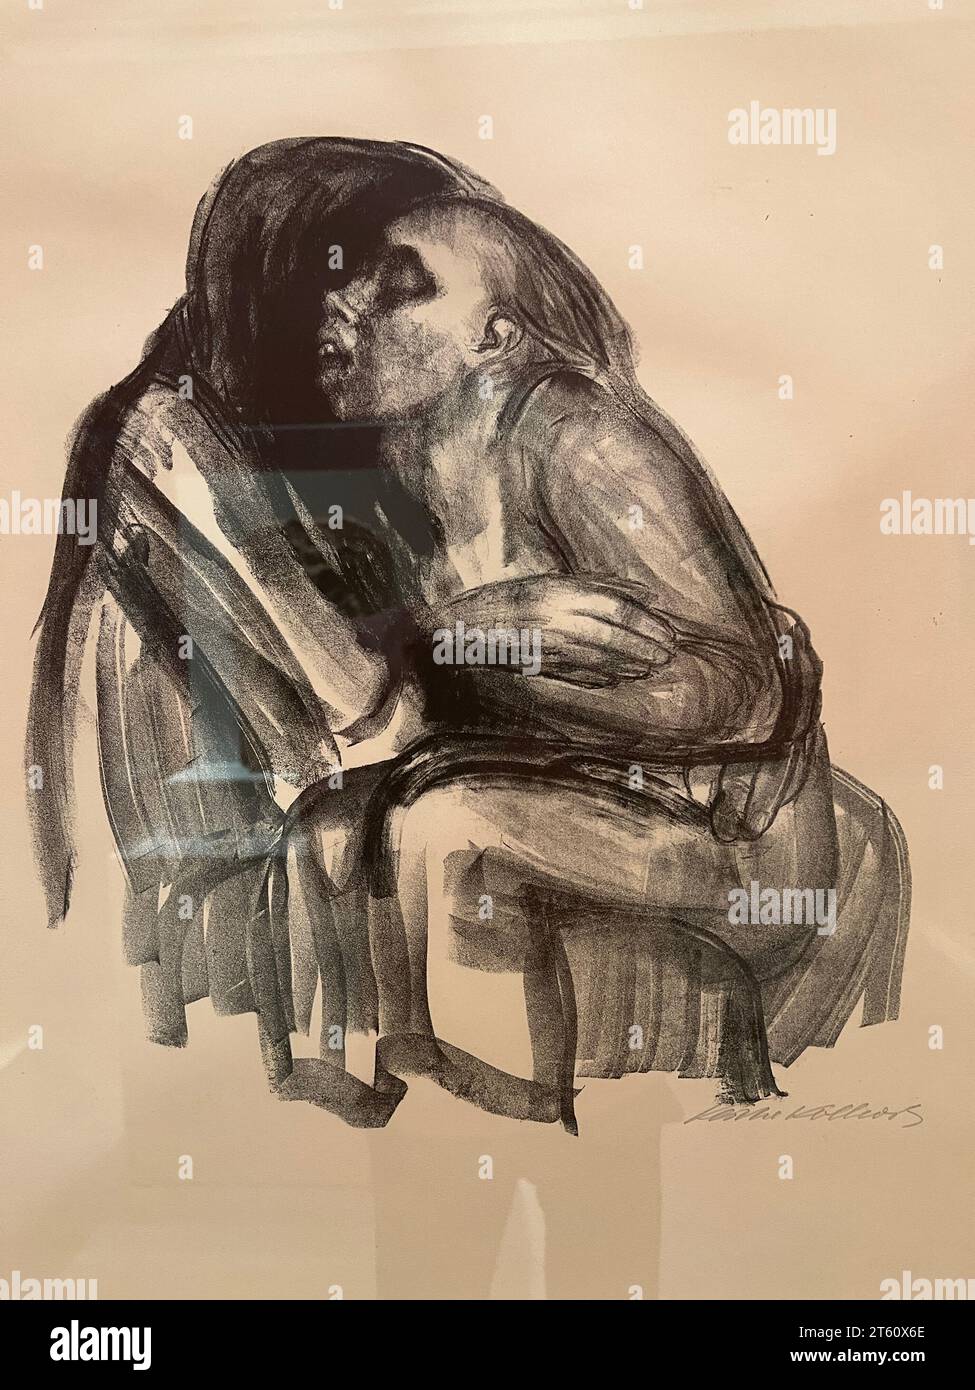 Young Girl in the Lap of Death, 1934 Lithograph on wove paper. Käthe Kollwitz,  This is one of eight haunting lithographs from a portfolio focusing on the figure of Death that Käthe Kollwitz produced in the mid-1930s, as Nazism was on the rise..  Brooklyn Museum, New York City. Stock Photo